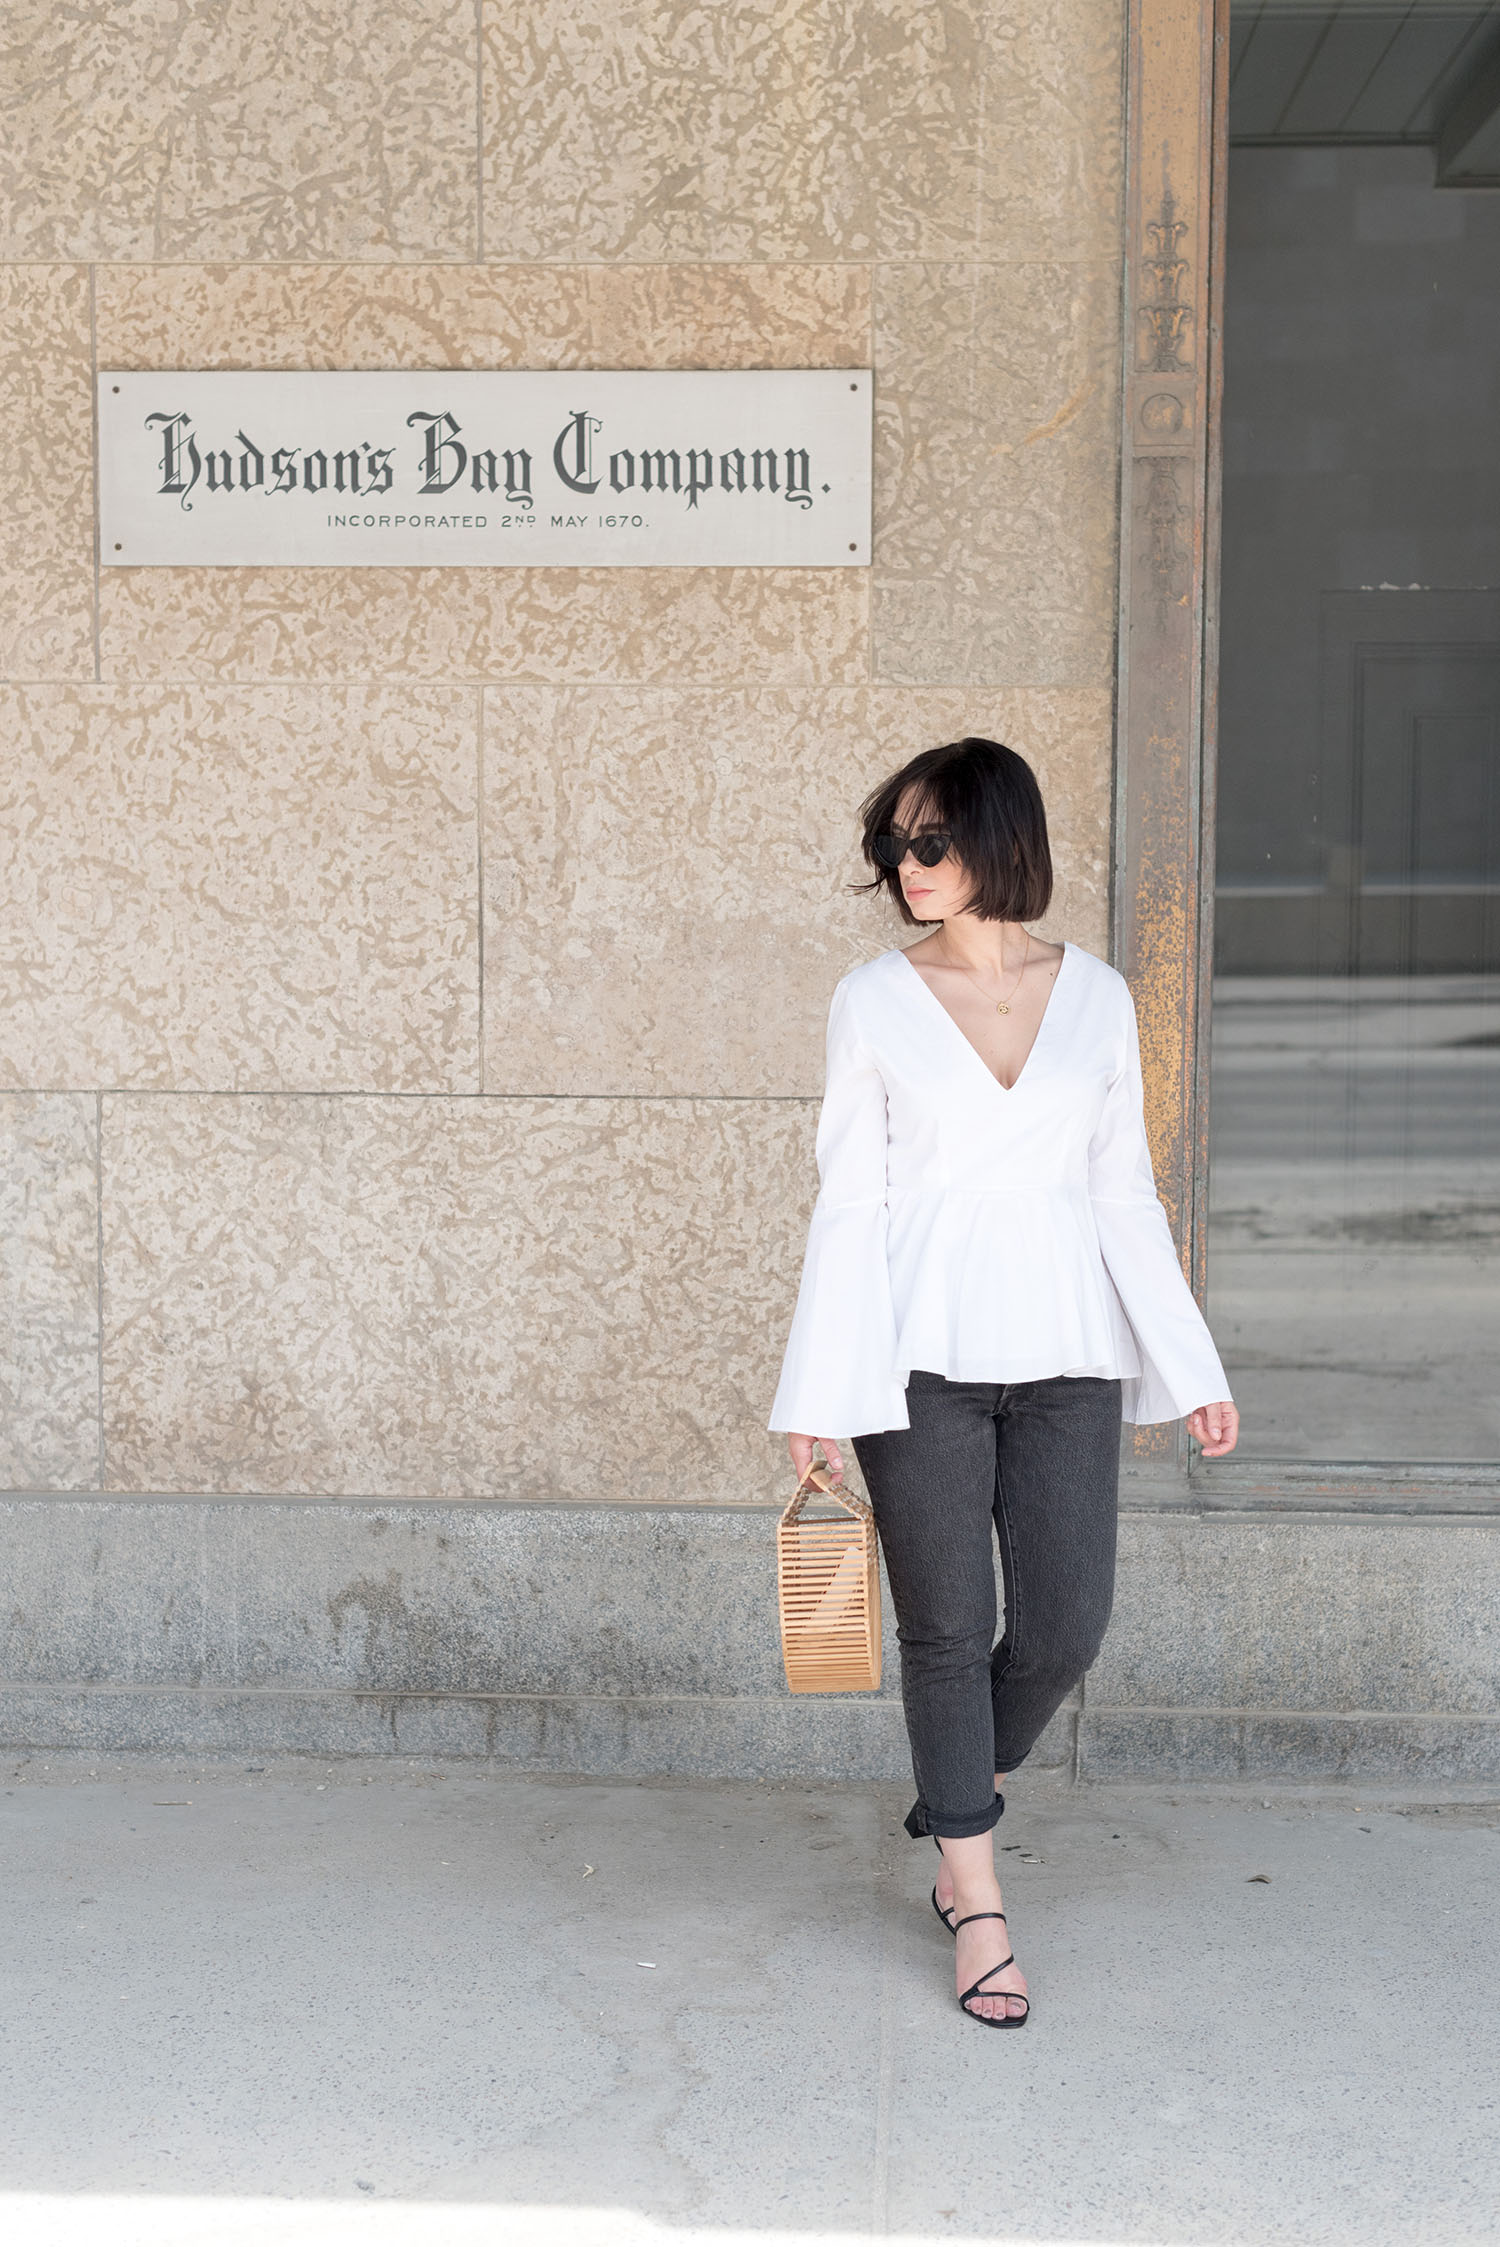 Top Canadian fashion blogger Cee Fardoe of Coco & Vera walks outside the Bay Downtown in Winnipeg wearing Zara sandals and carrying a bamboo cage bag, the wind blowing through her hair